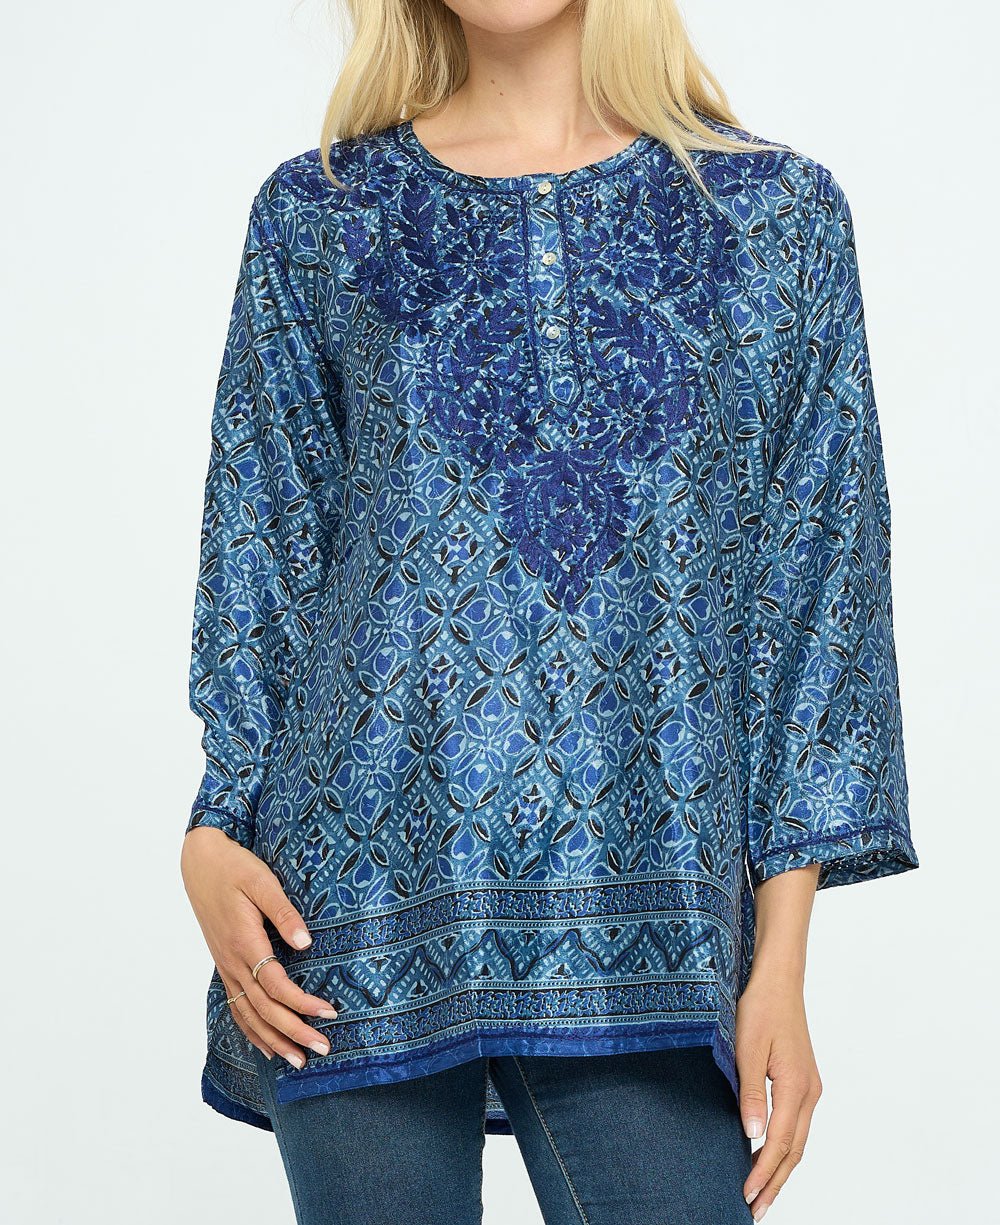 Blue Geometry Tunic With Hand Embroidery - Shirts & Tops S